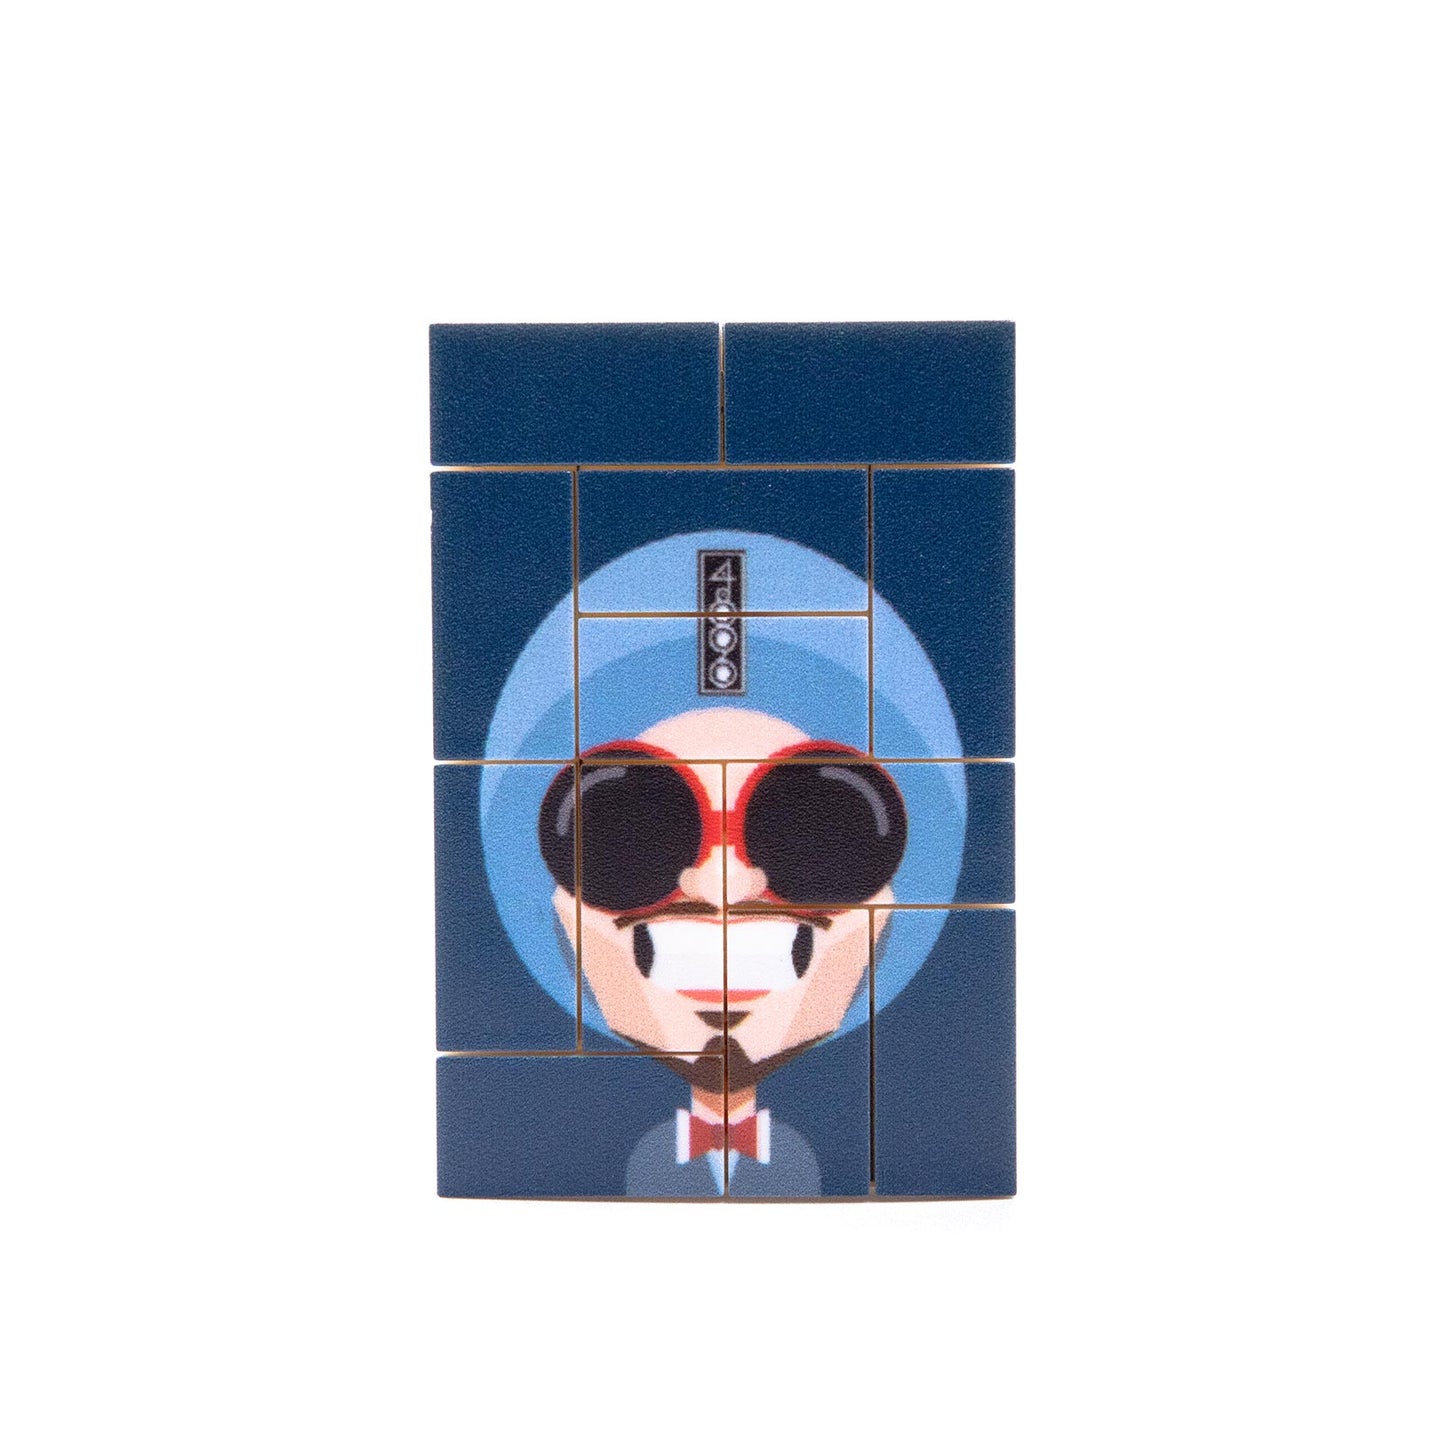 4896 x Namewee Magnet Mini Puzzle (Blue)